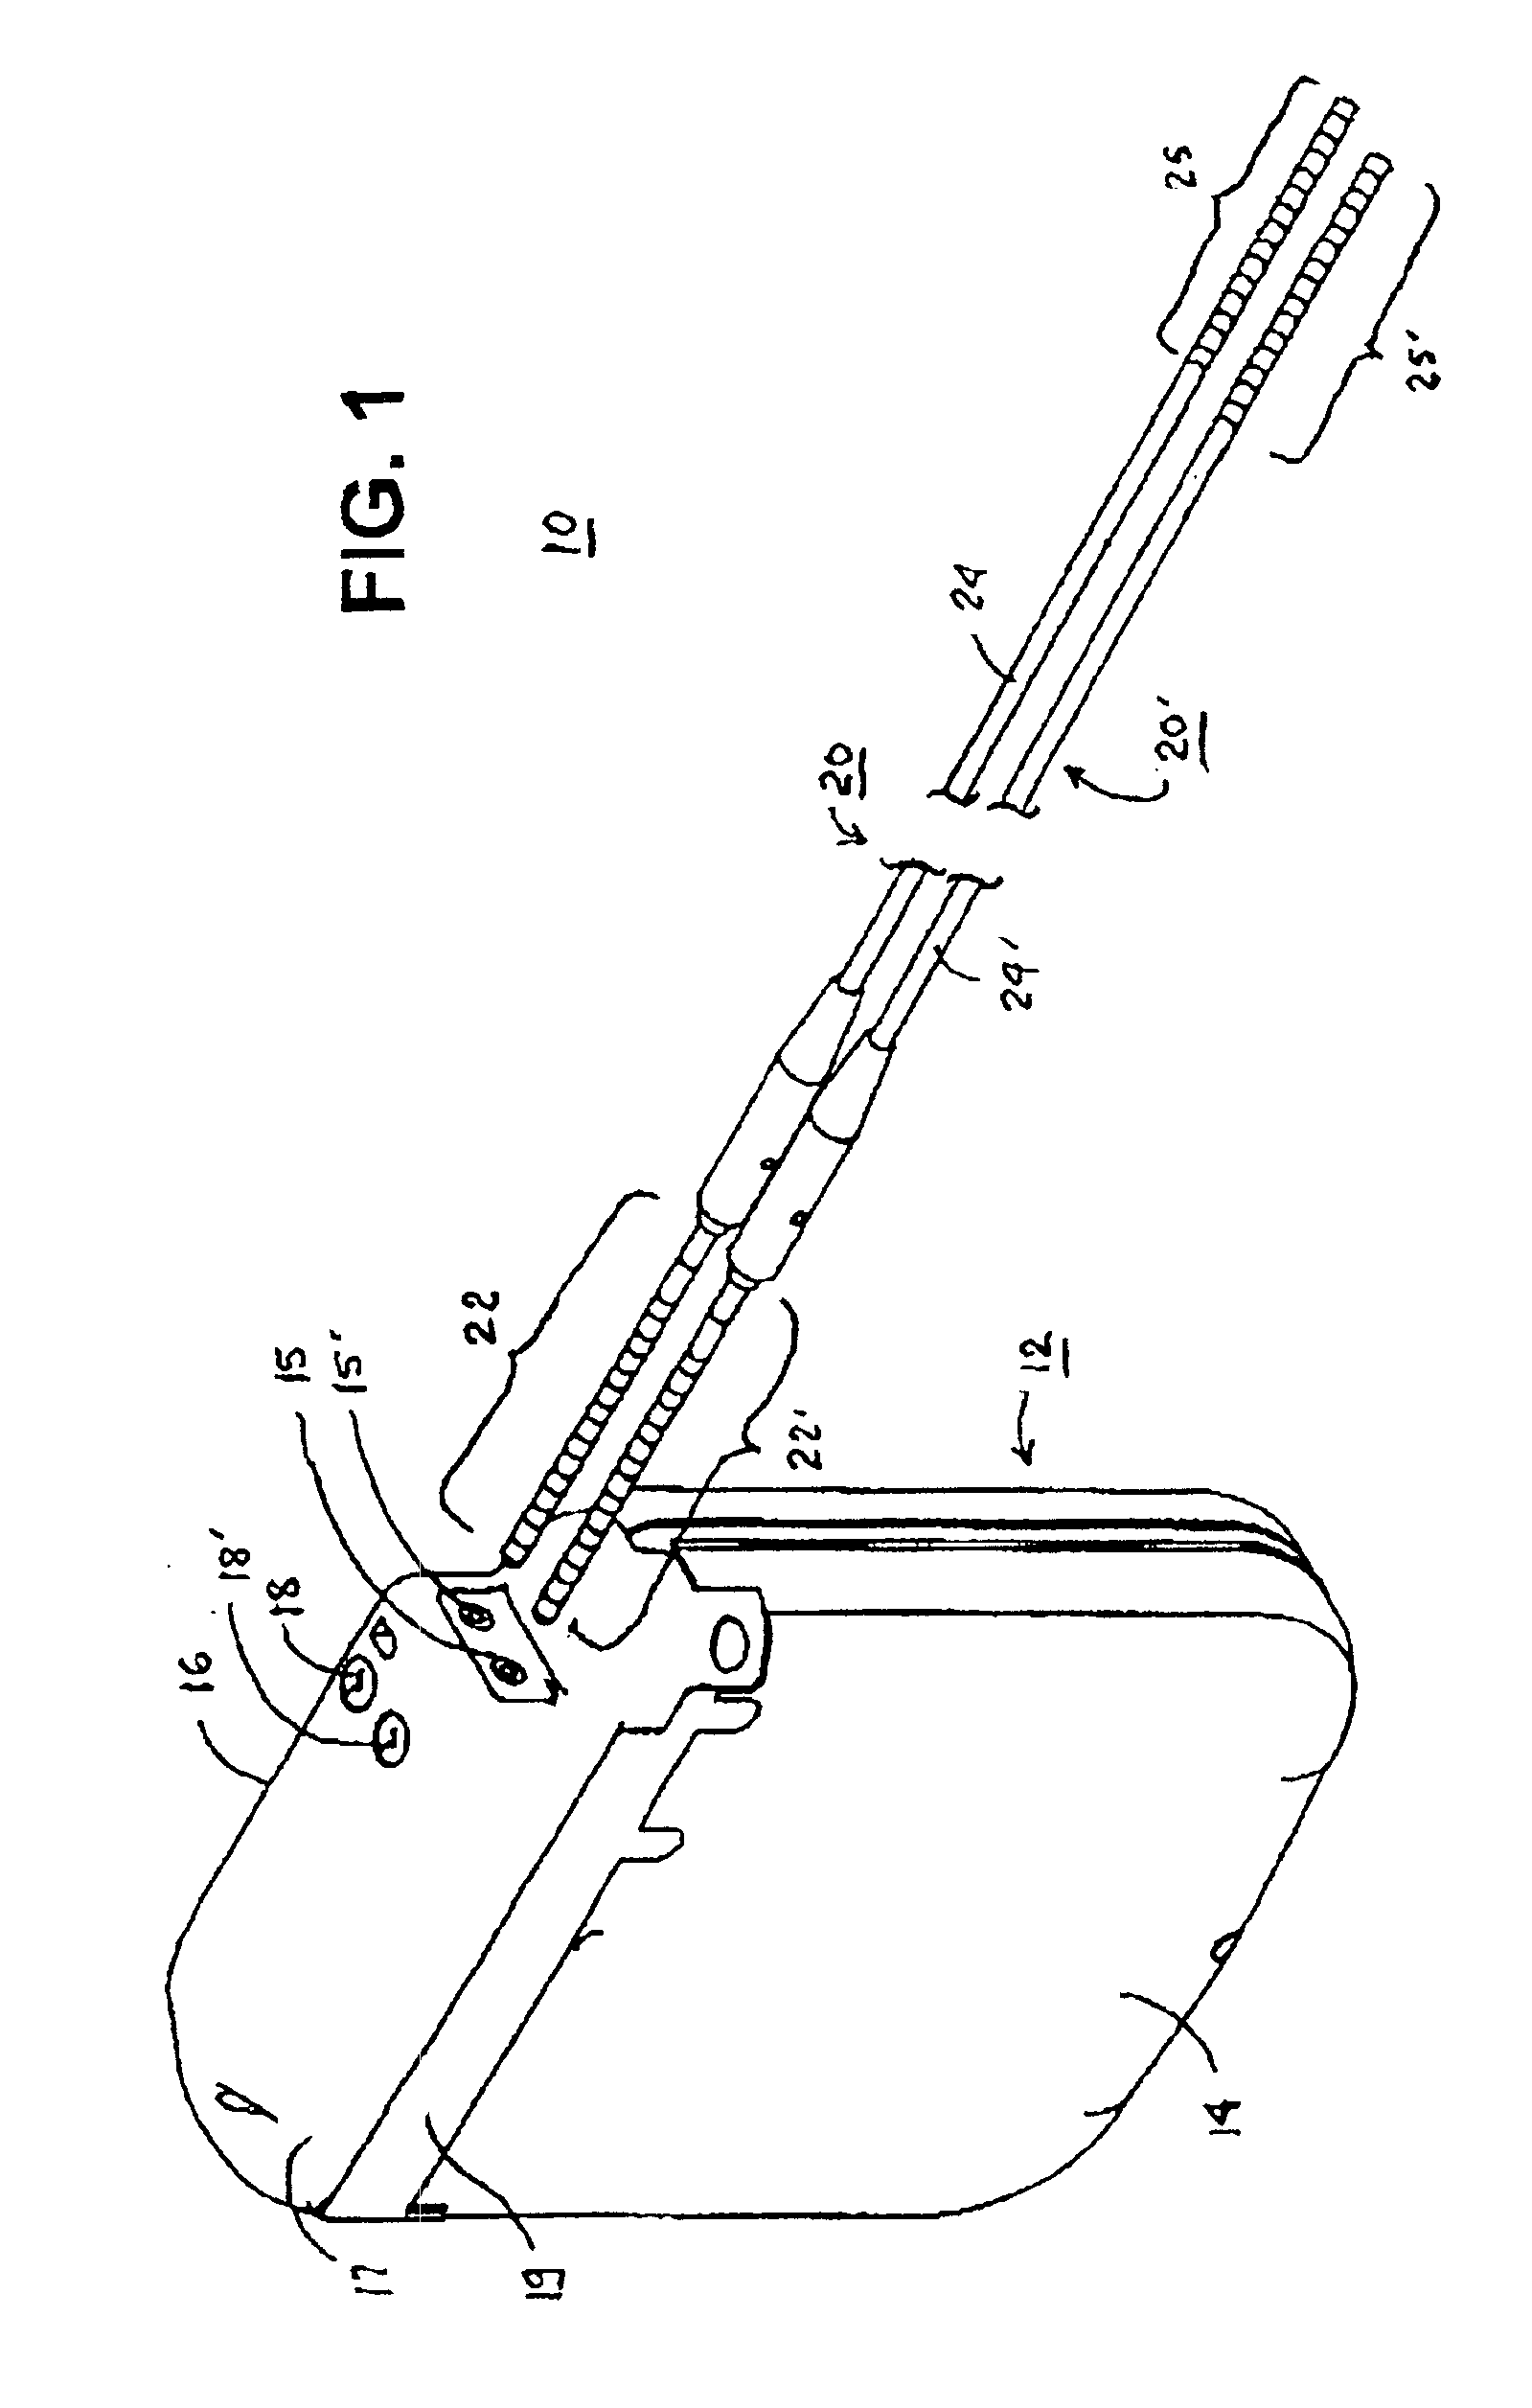 In-line lead header for an implantable medical device